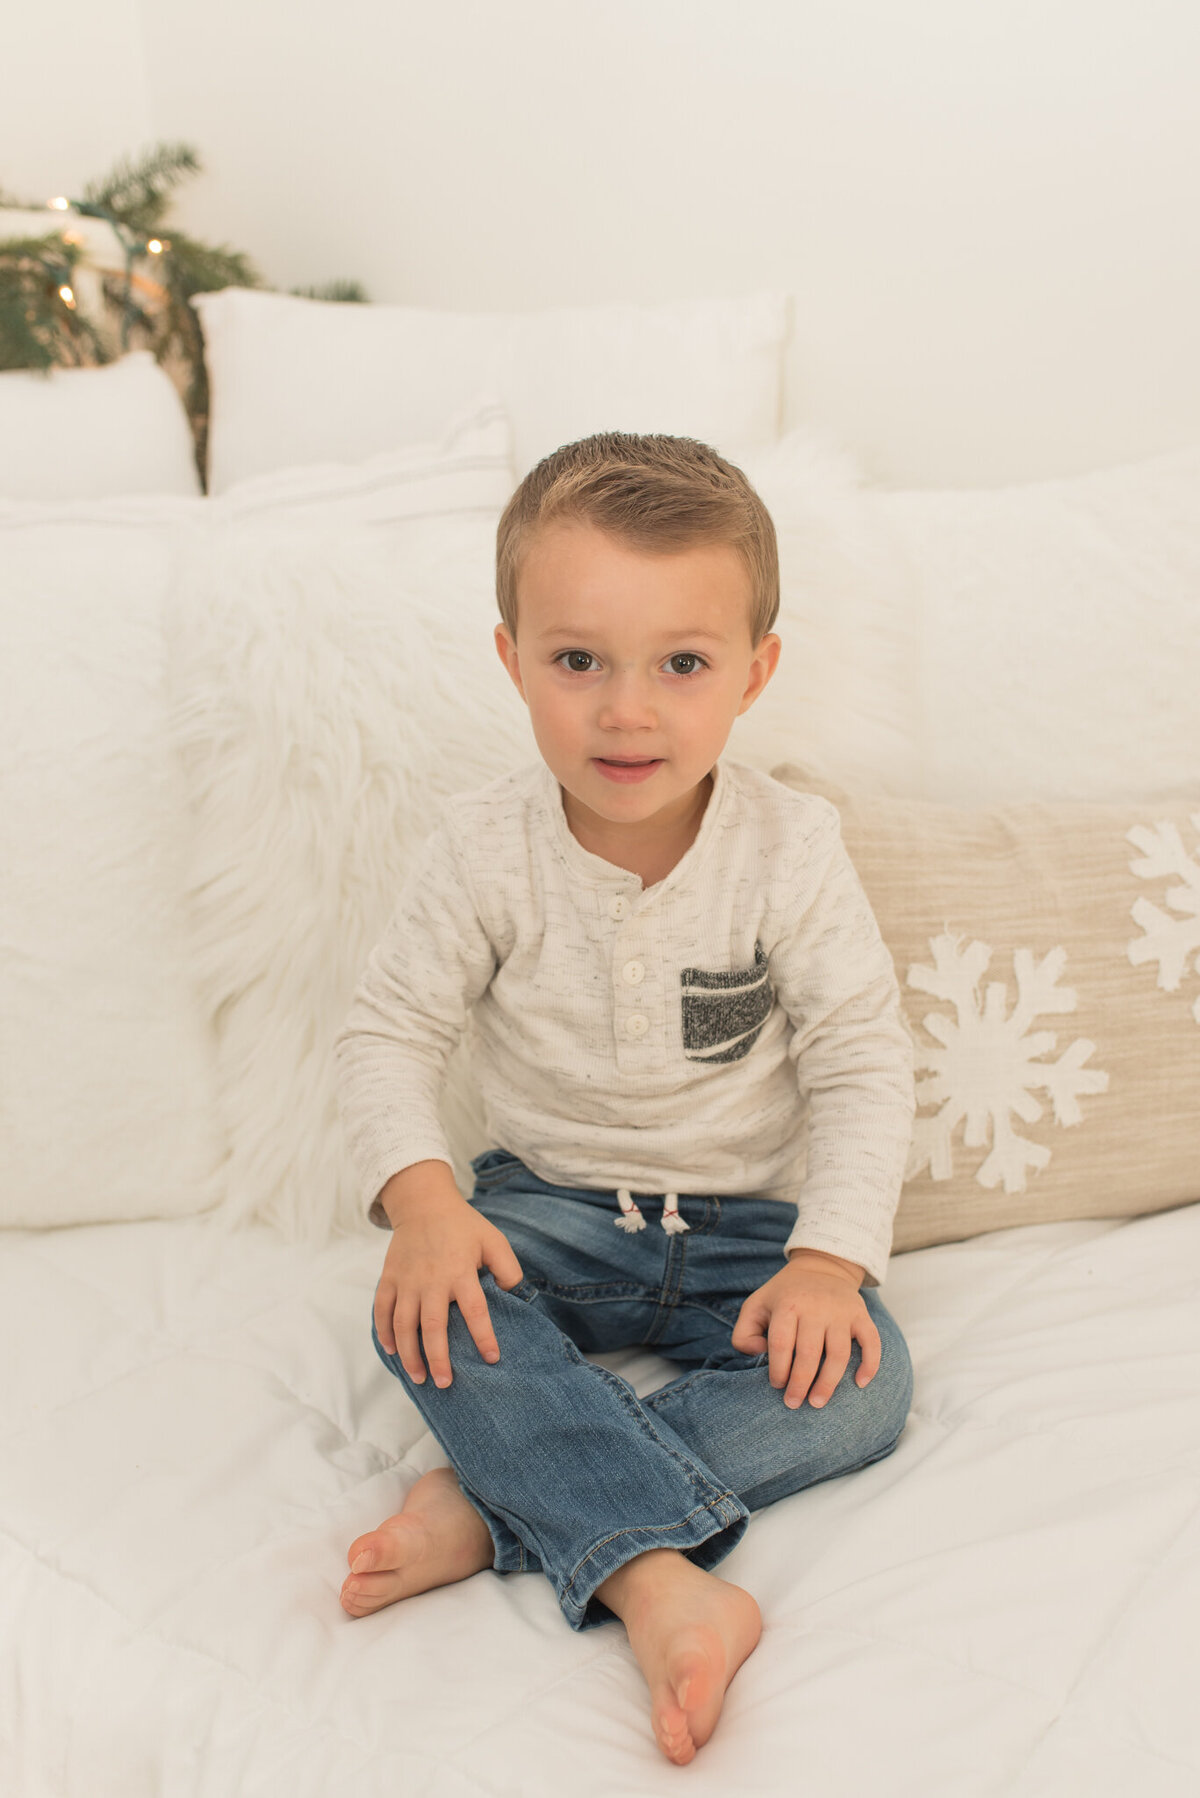 Young boy wearing tan sweater sitting on white bed